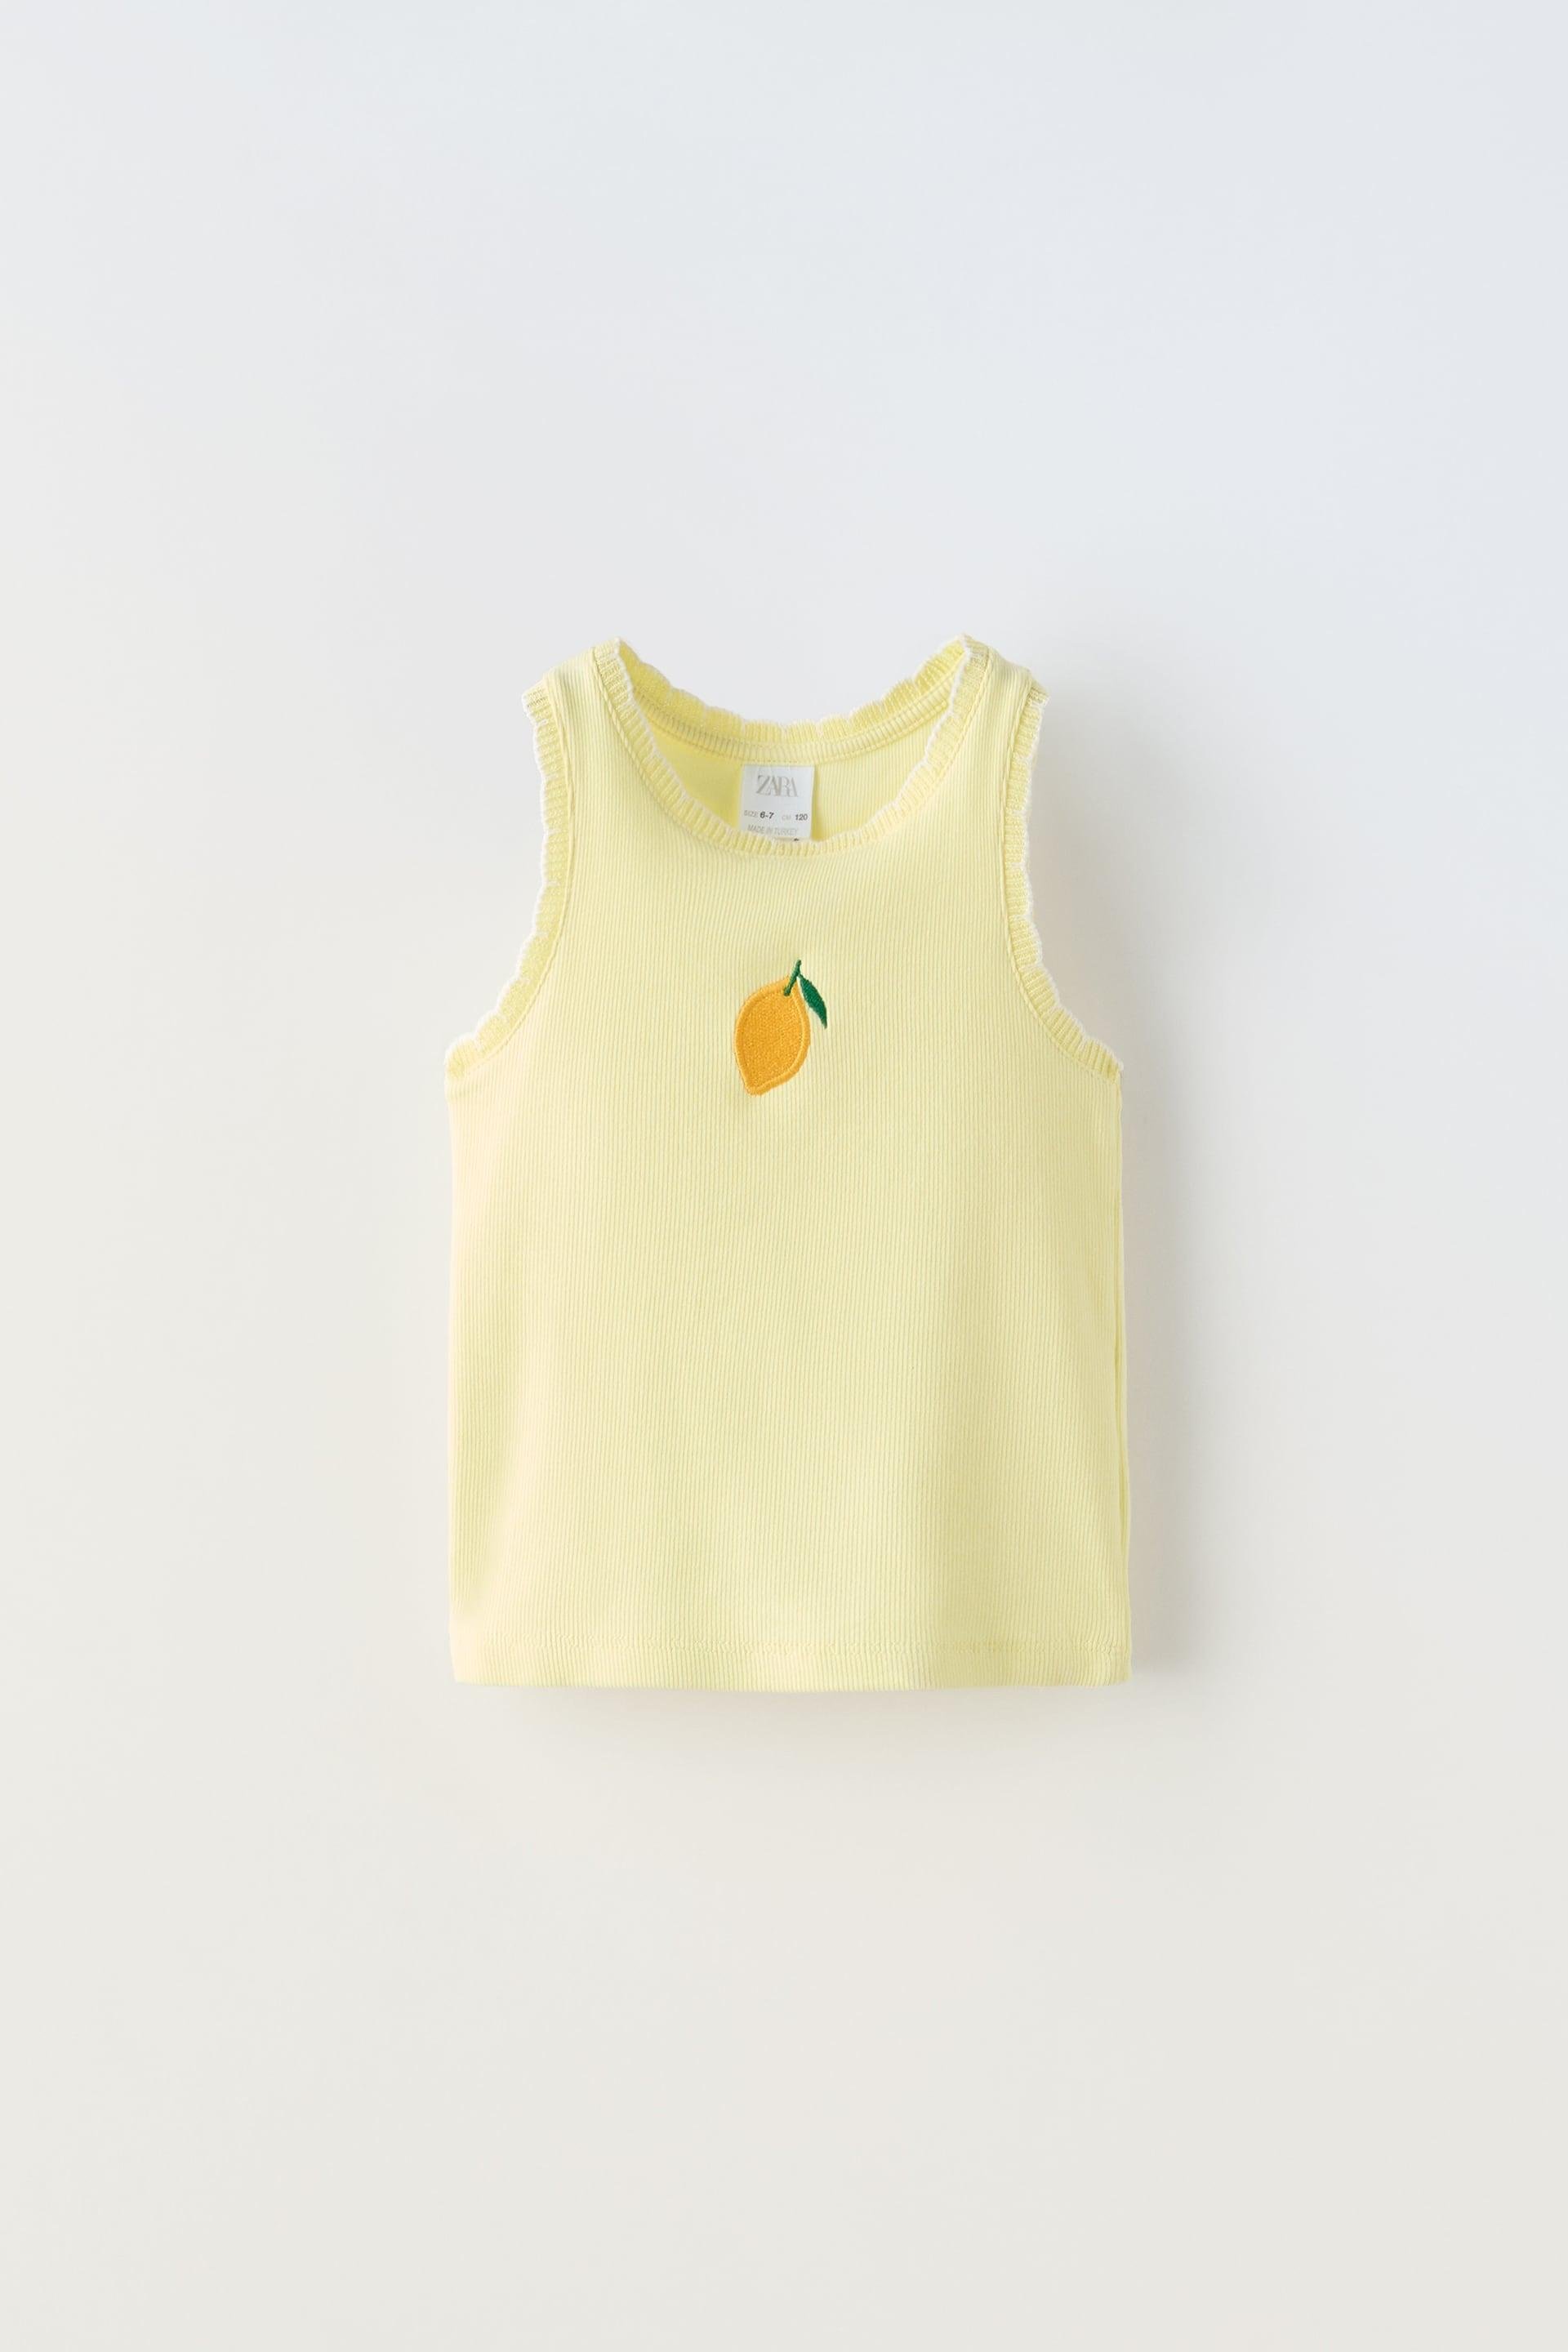 EMBROIDERED FRUIT RIB TANK TOP by ZARA